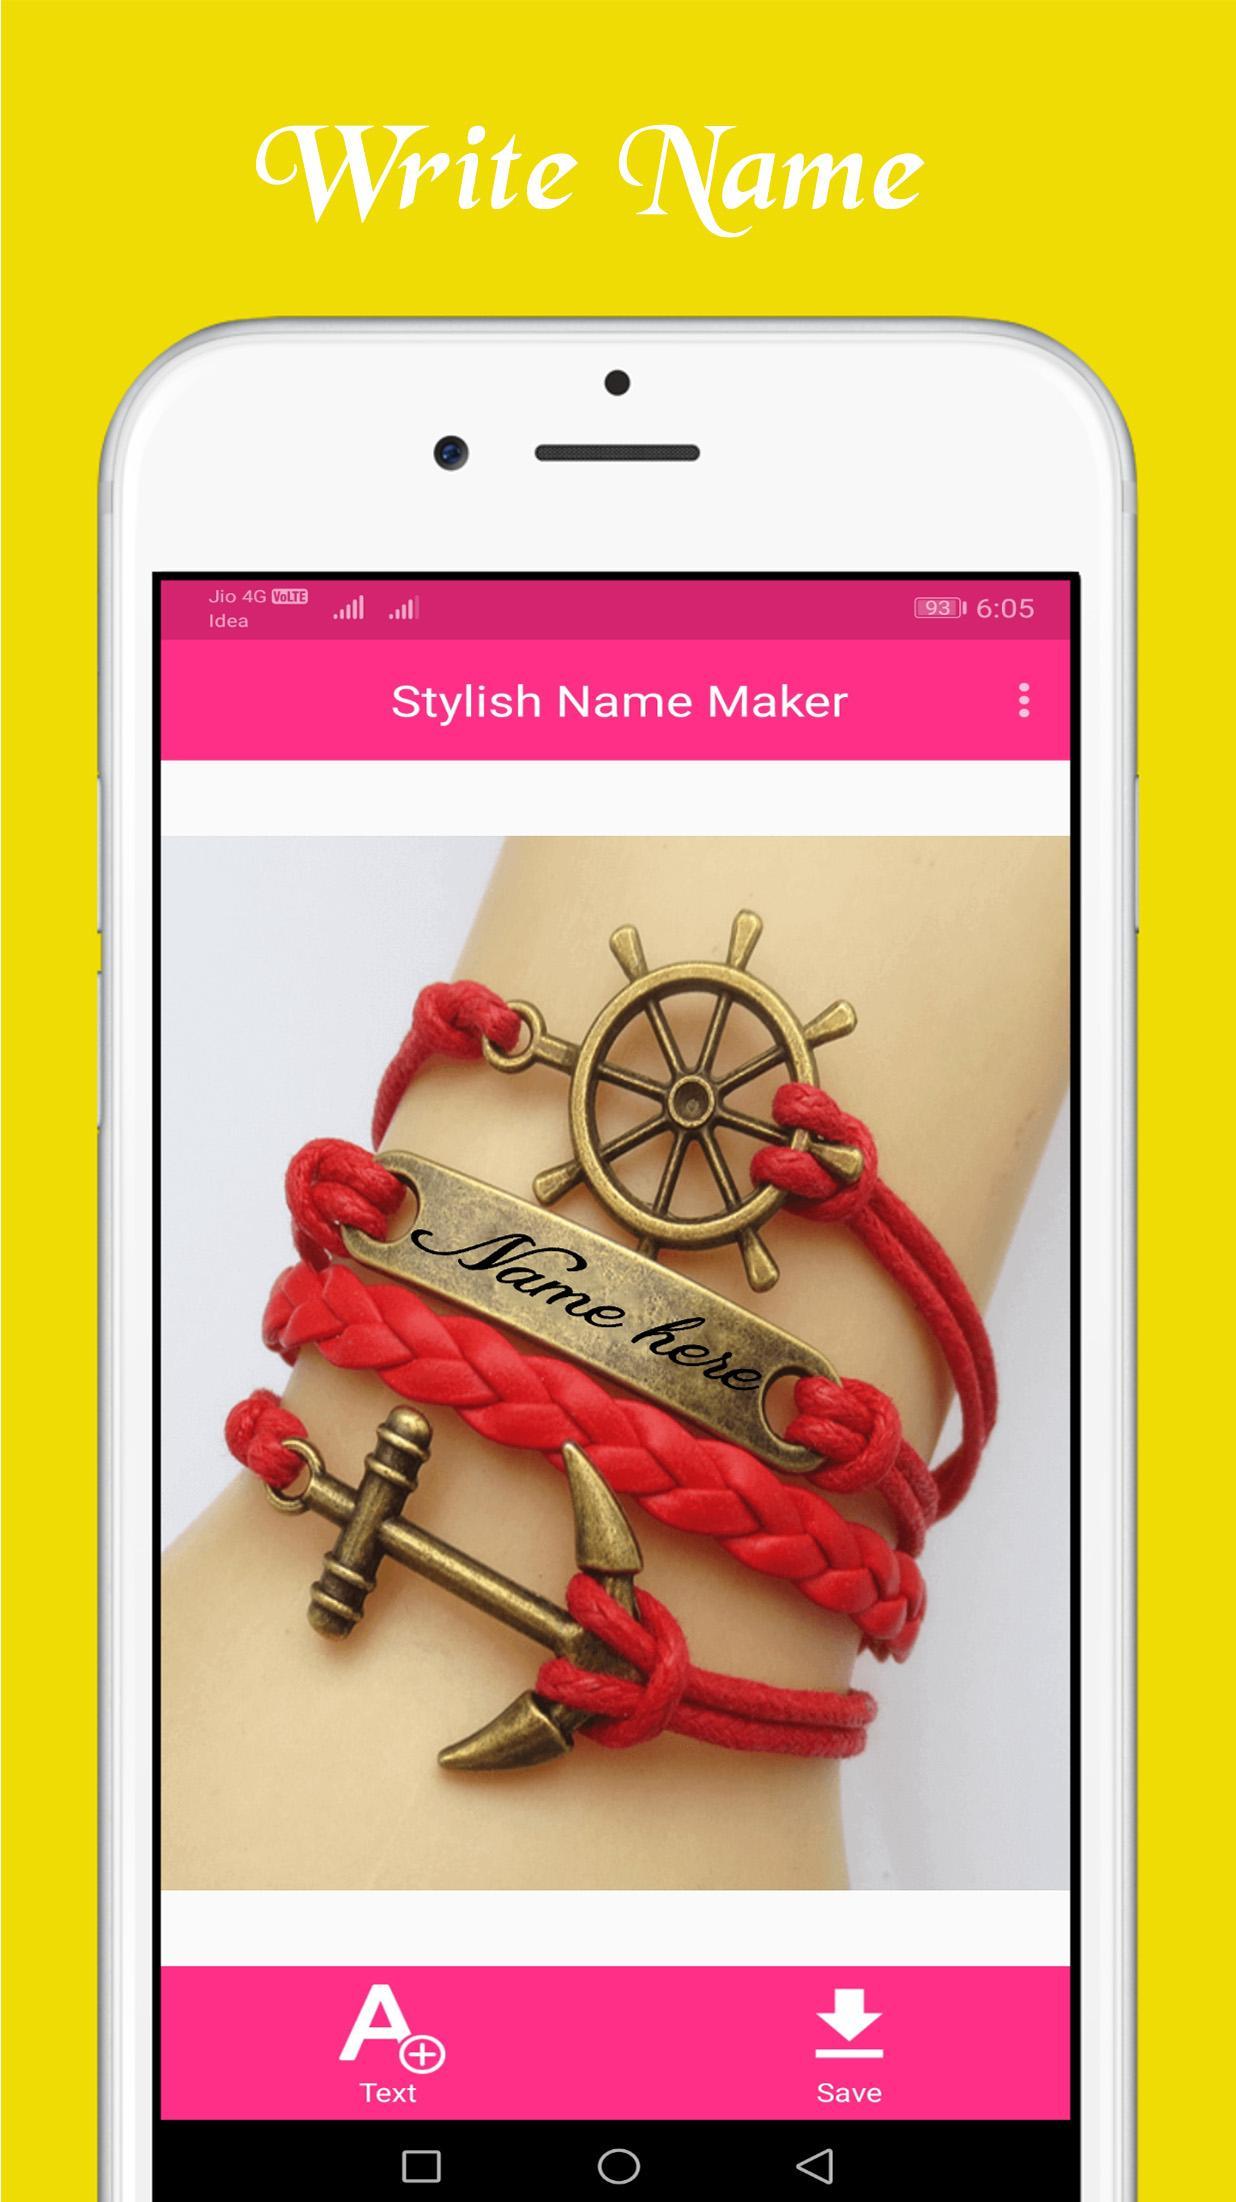 Stylish Name Maker for Android - APK Download